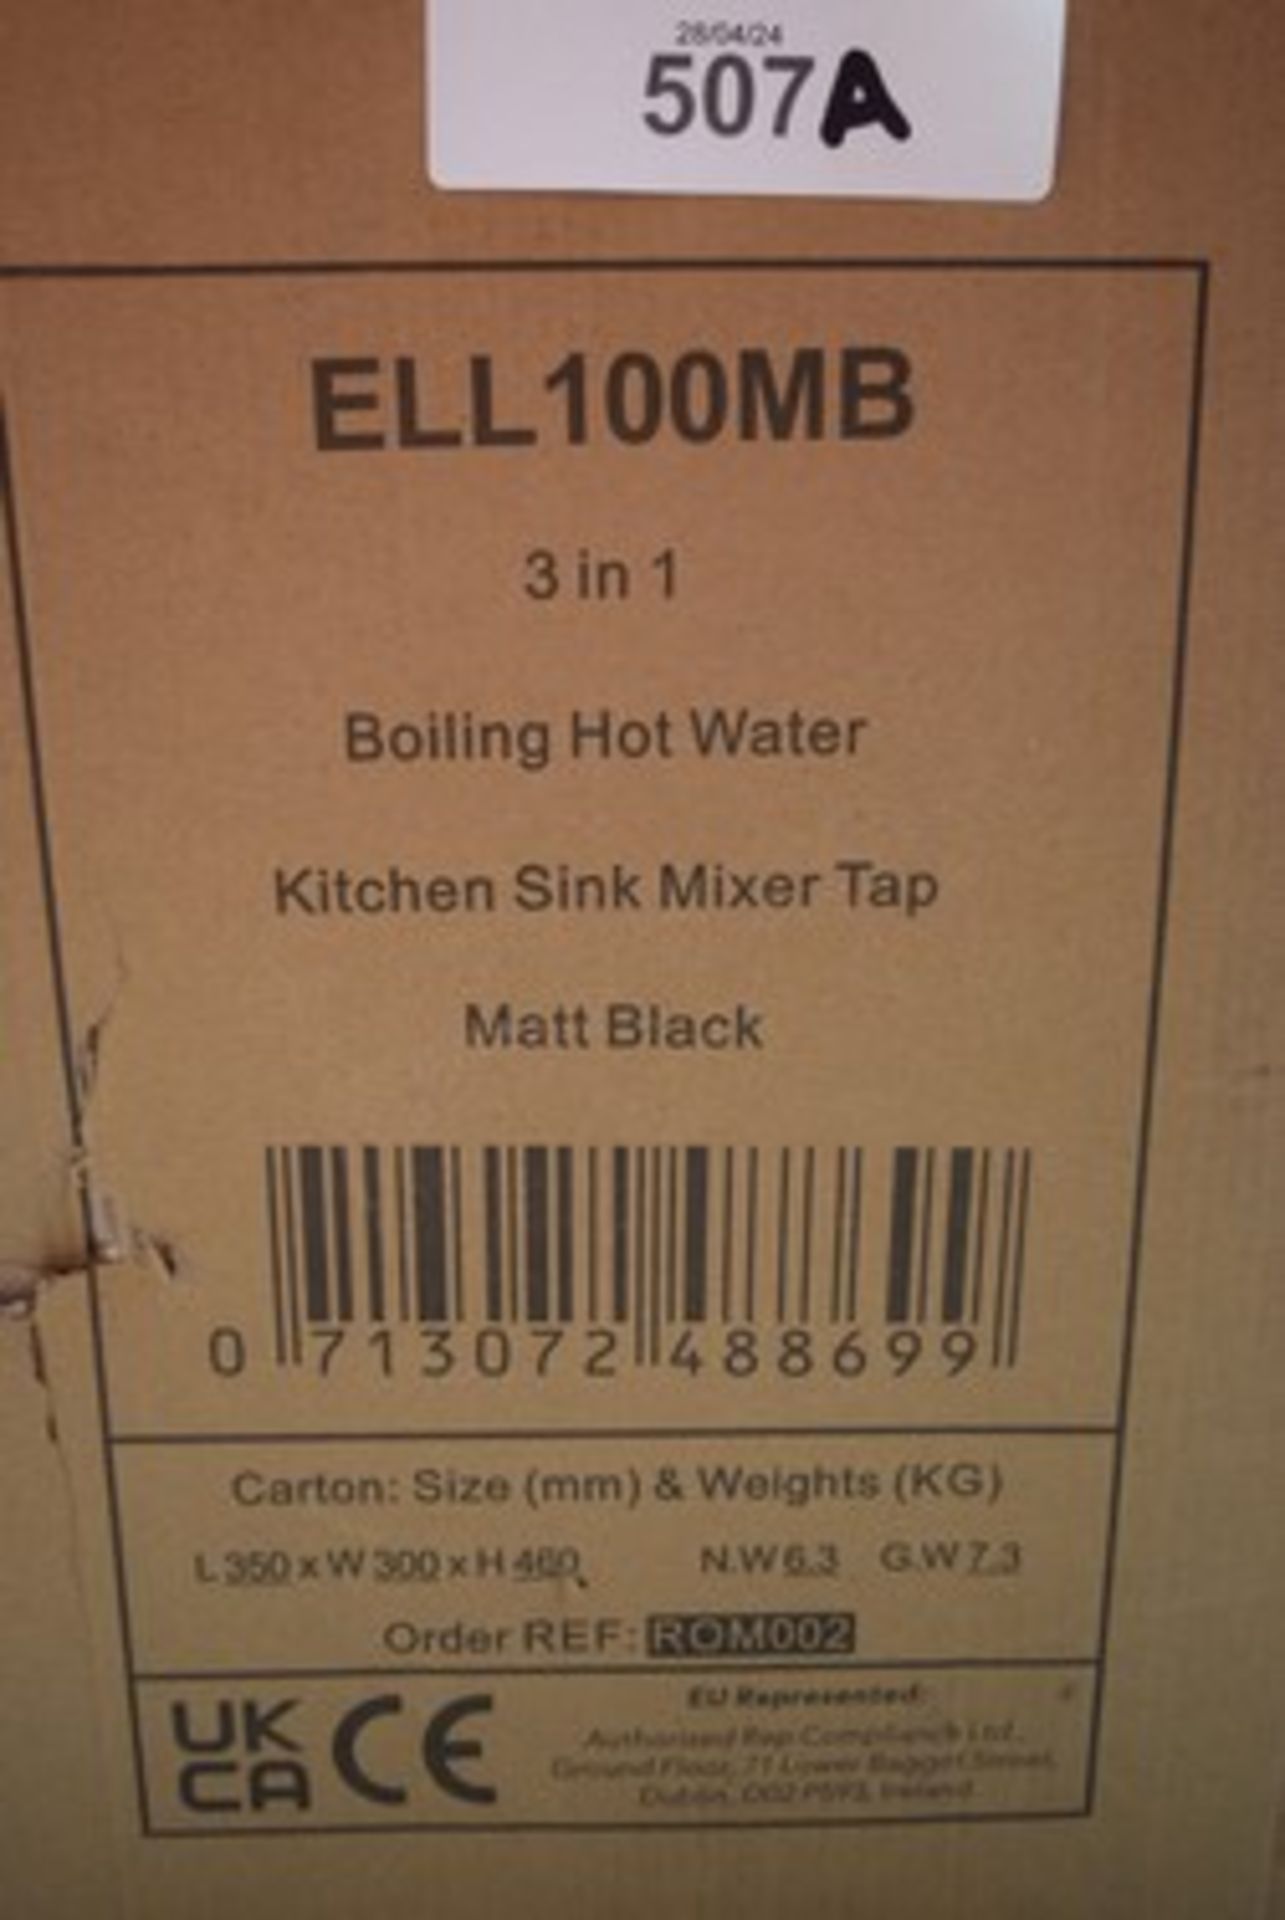 1 x Ellsi 3 in 1 boiling hot water kitchen sink mixer tap, matt black - sealed new in box (GS28A) - Image 2 of 3